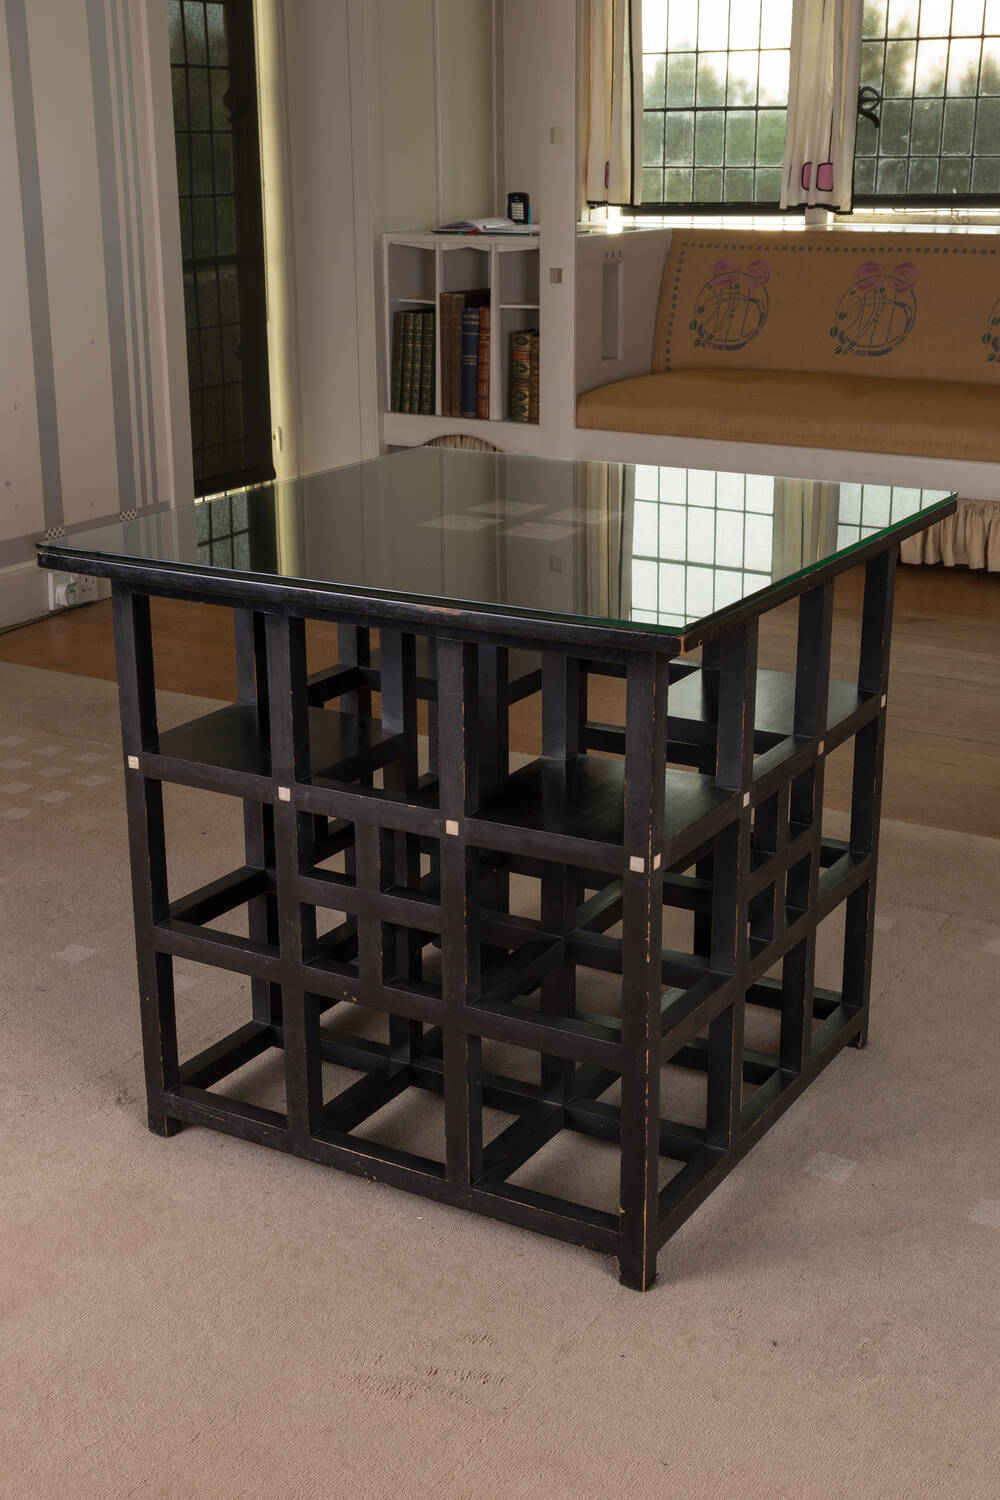 A wooden centre table designed by Charles Rennie Mackintosh. The top is inlaid with mother-of-pearl and covered by a glass square. The base is made up of a grid of wooden squares.